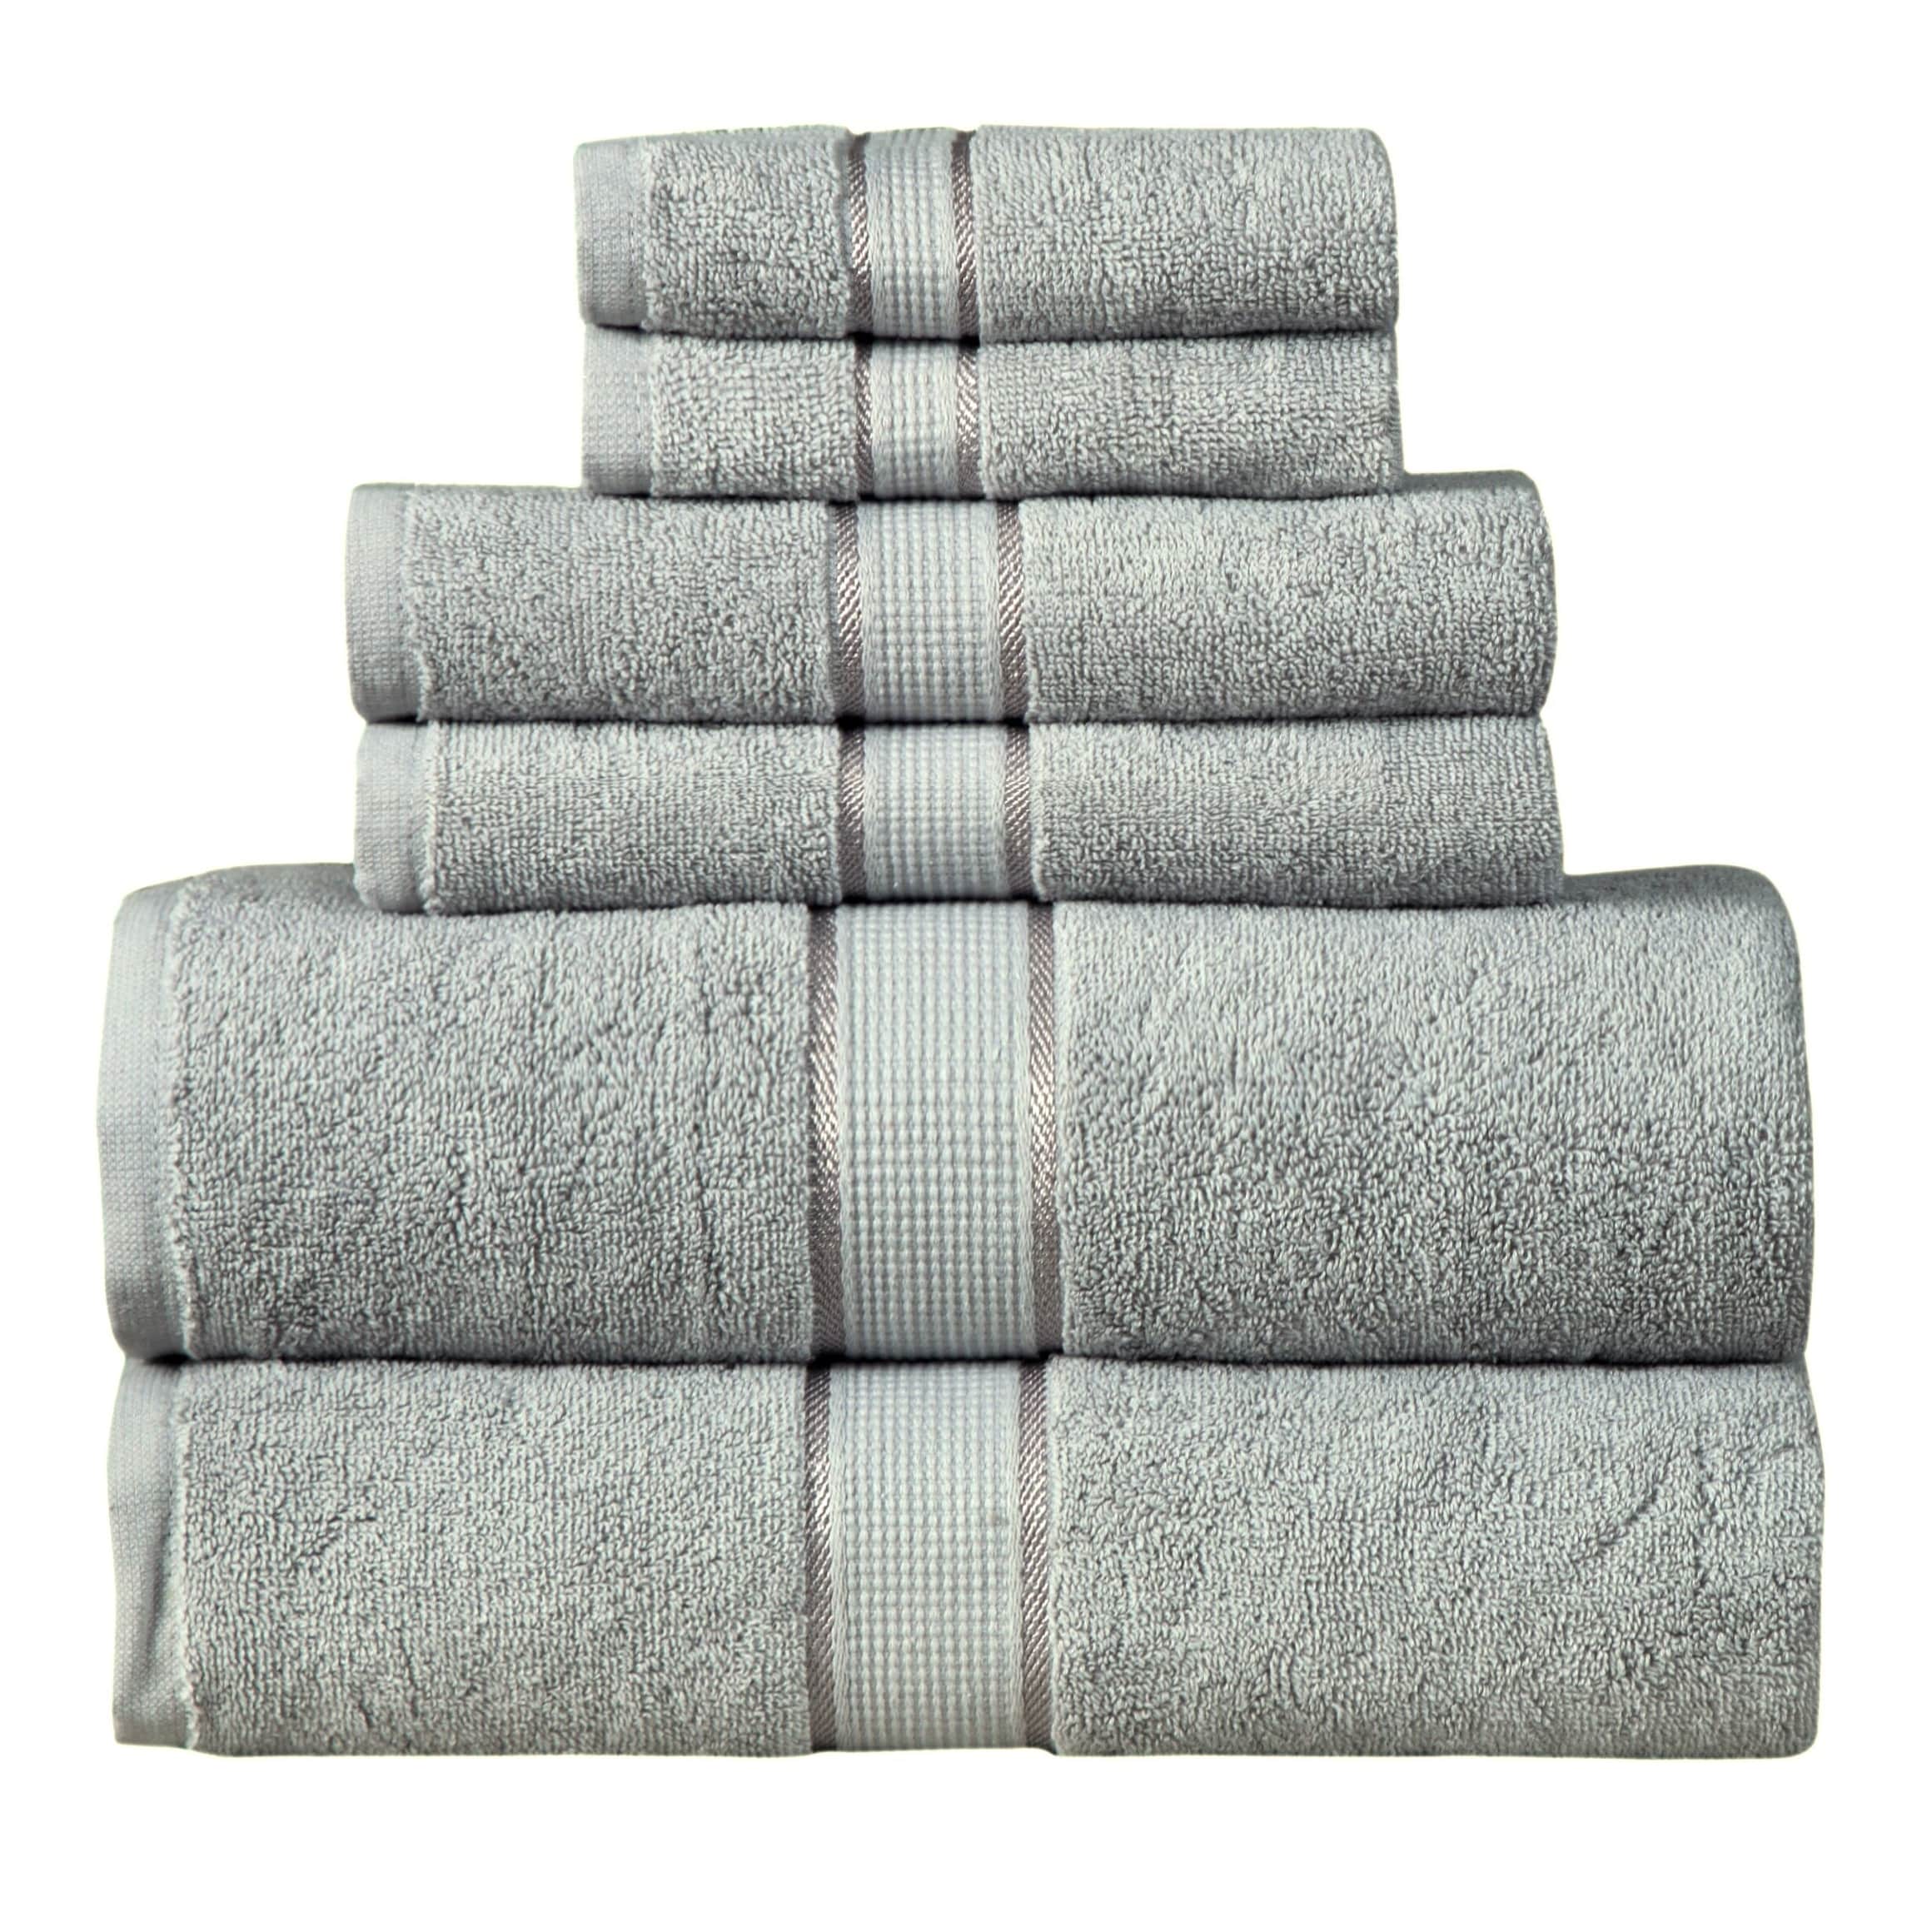 2 X LUXURY STRIPED BRIGHT 100% COMBED COTTON SOFT ABSORBANT SILVER HAND TOWELS 